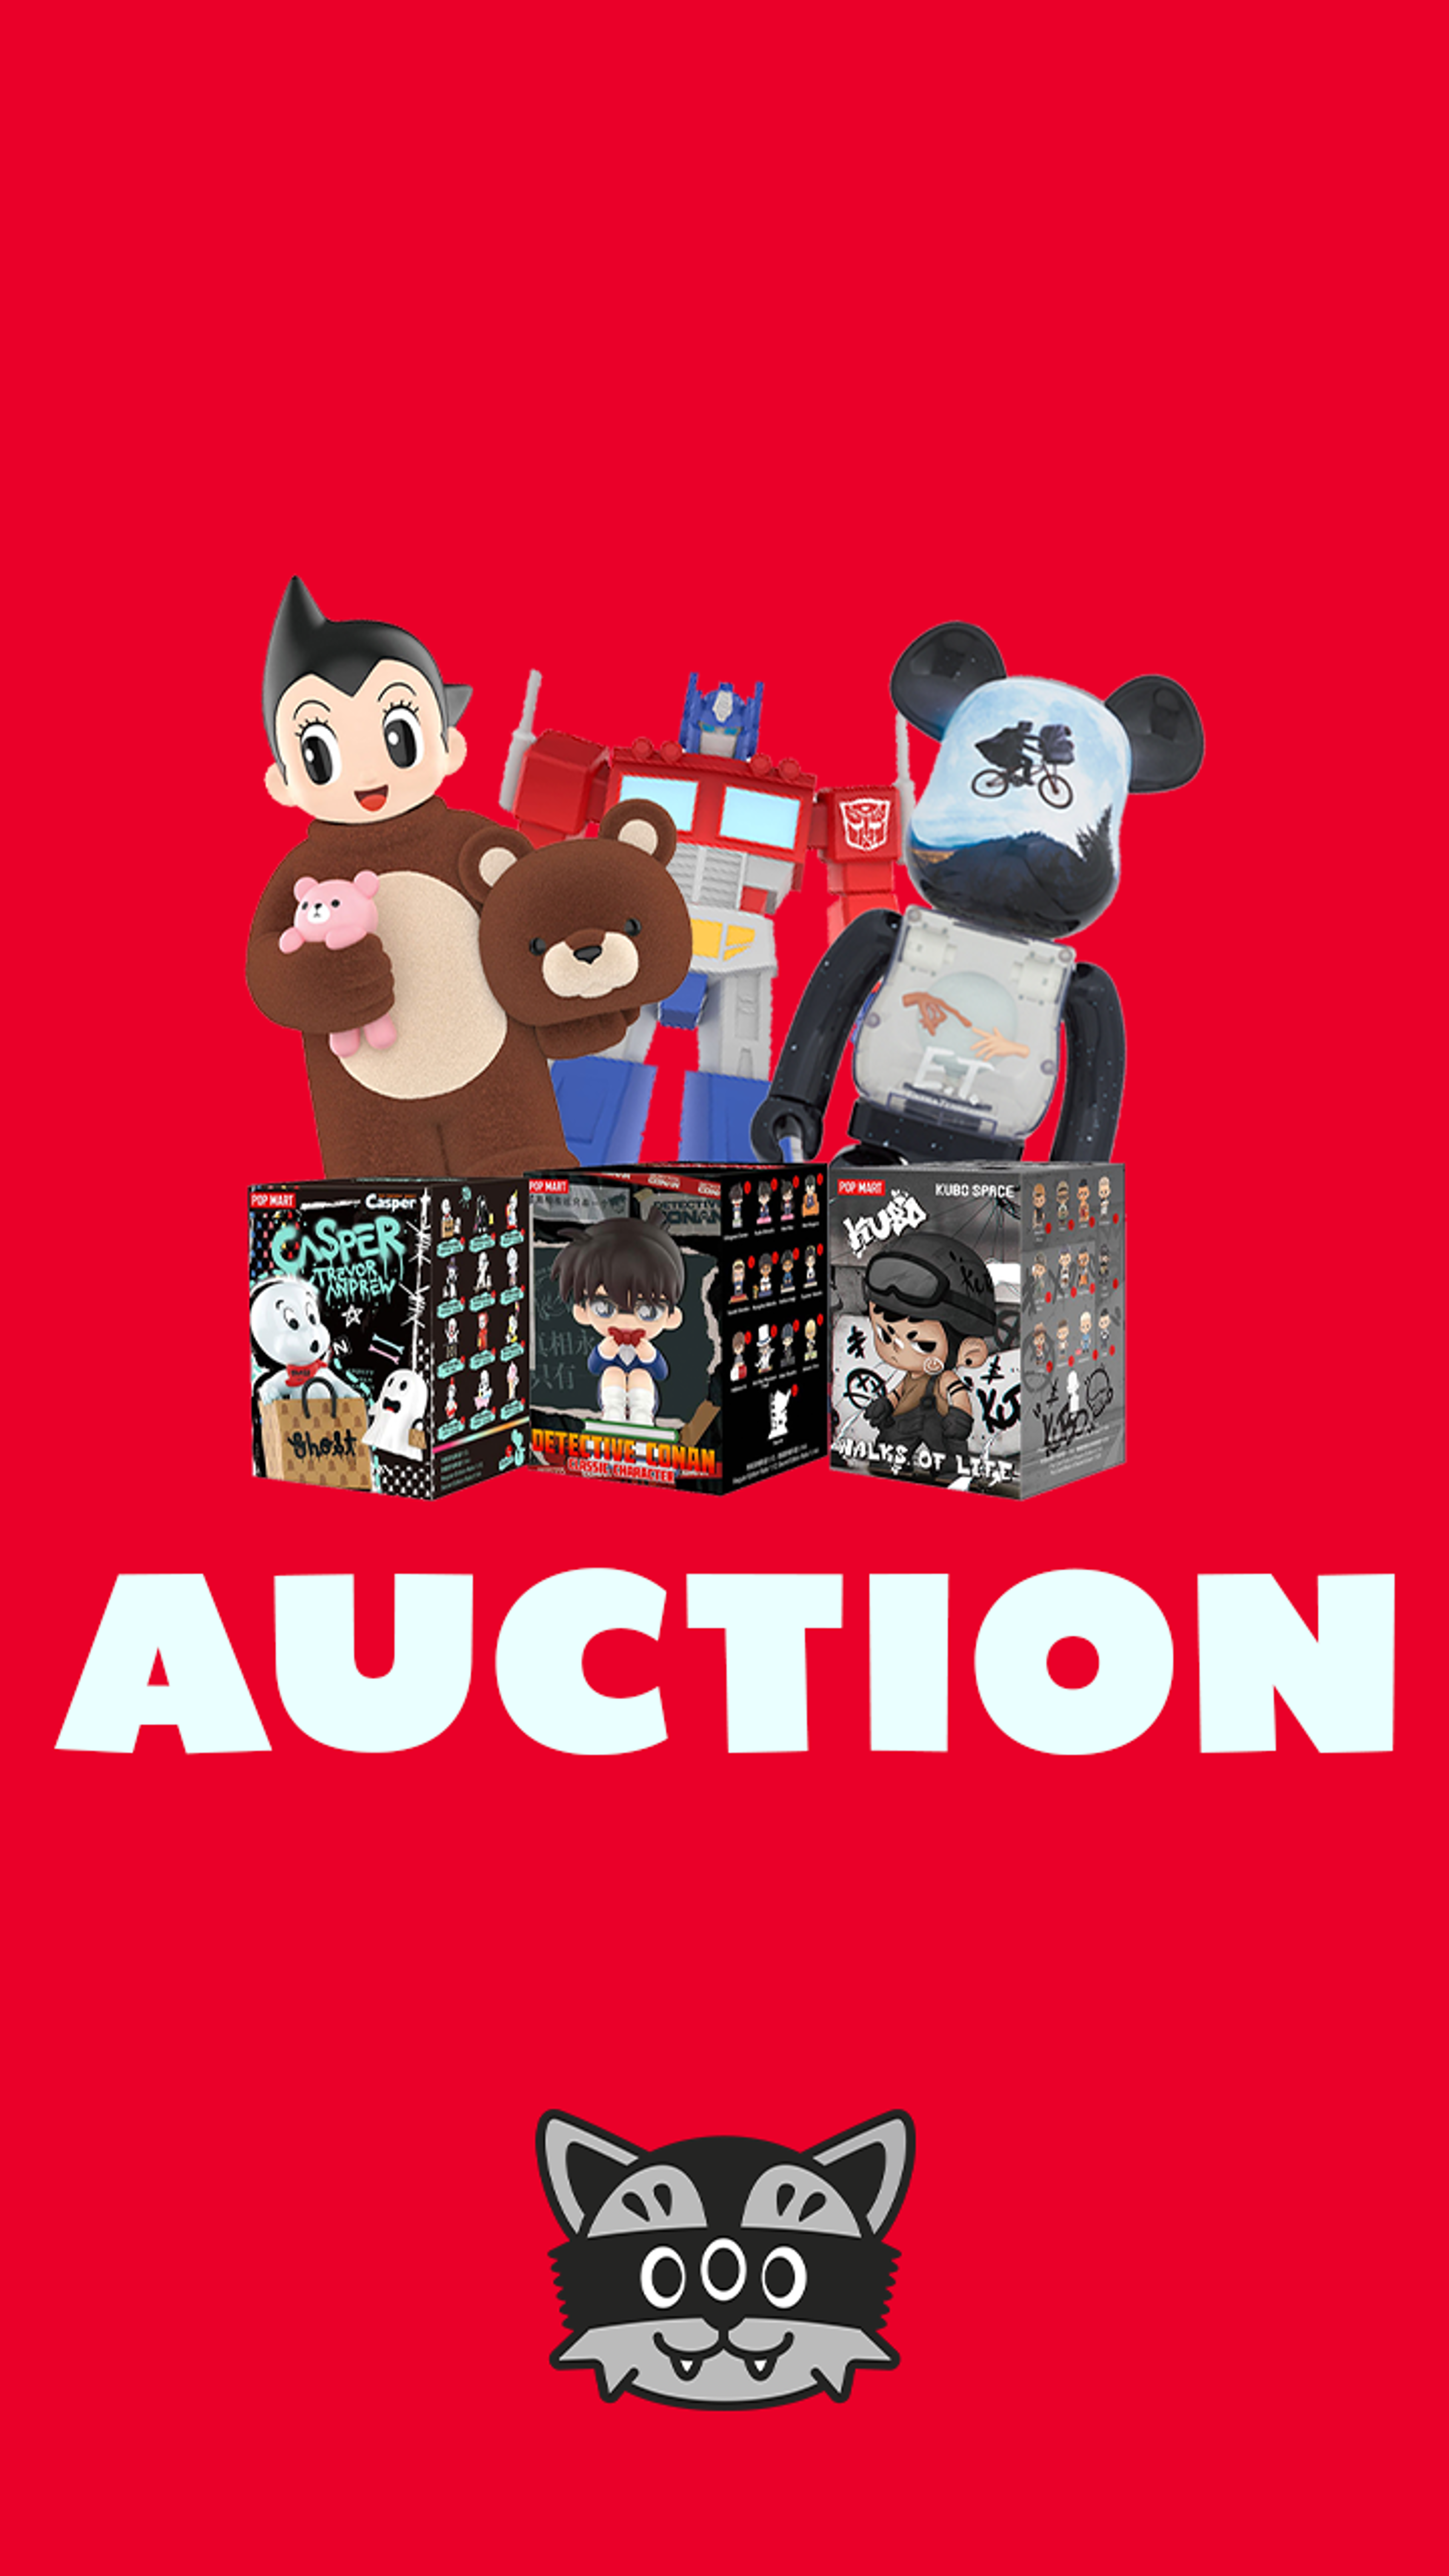 Preview image for the show titled "Mindzai Auction - April 23" at Today @ 5:00 PM